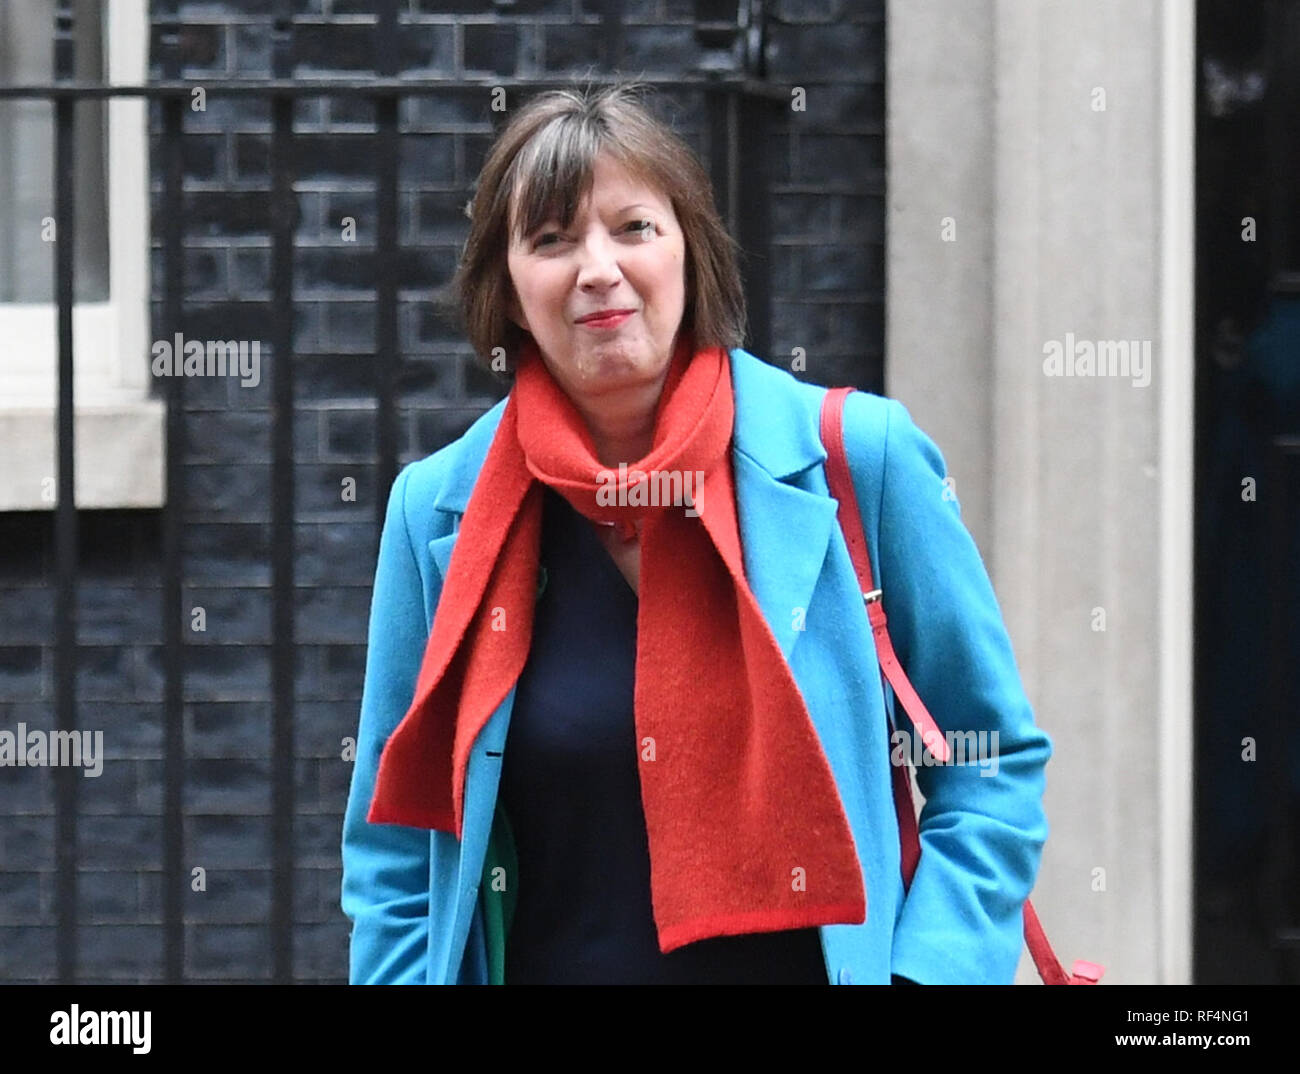 The TUC's Frances O'Grady leaves 10 Downing Streetl, London, following talks with the Government over Brexit. Stock Photo